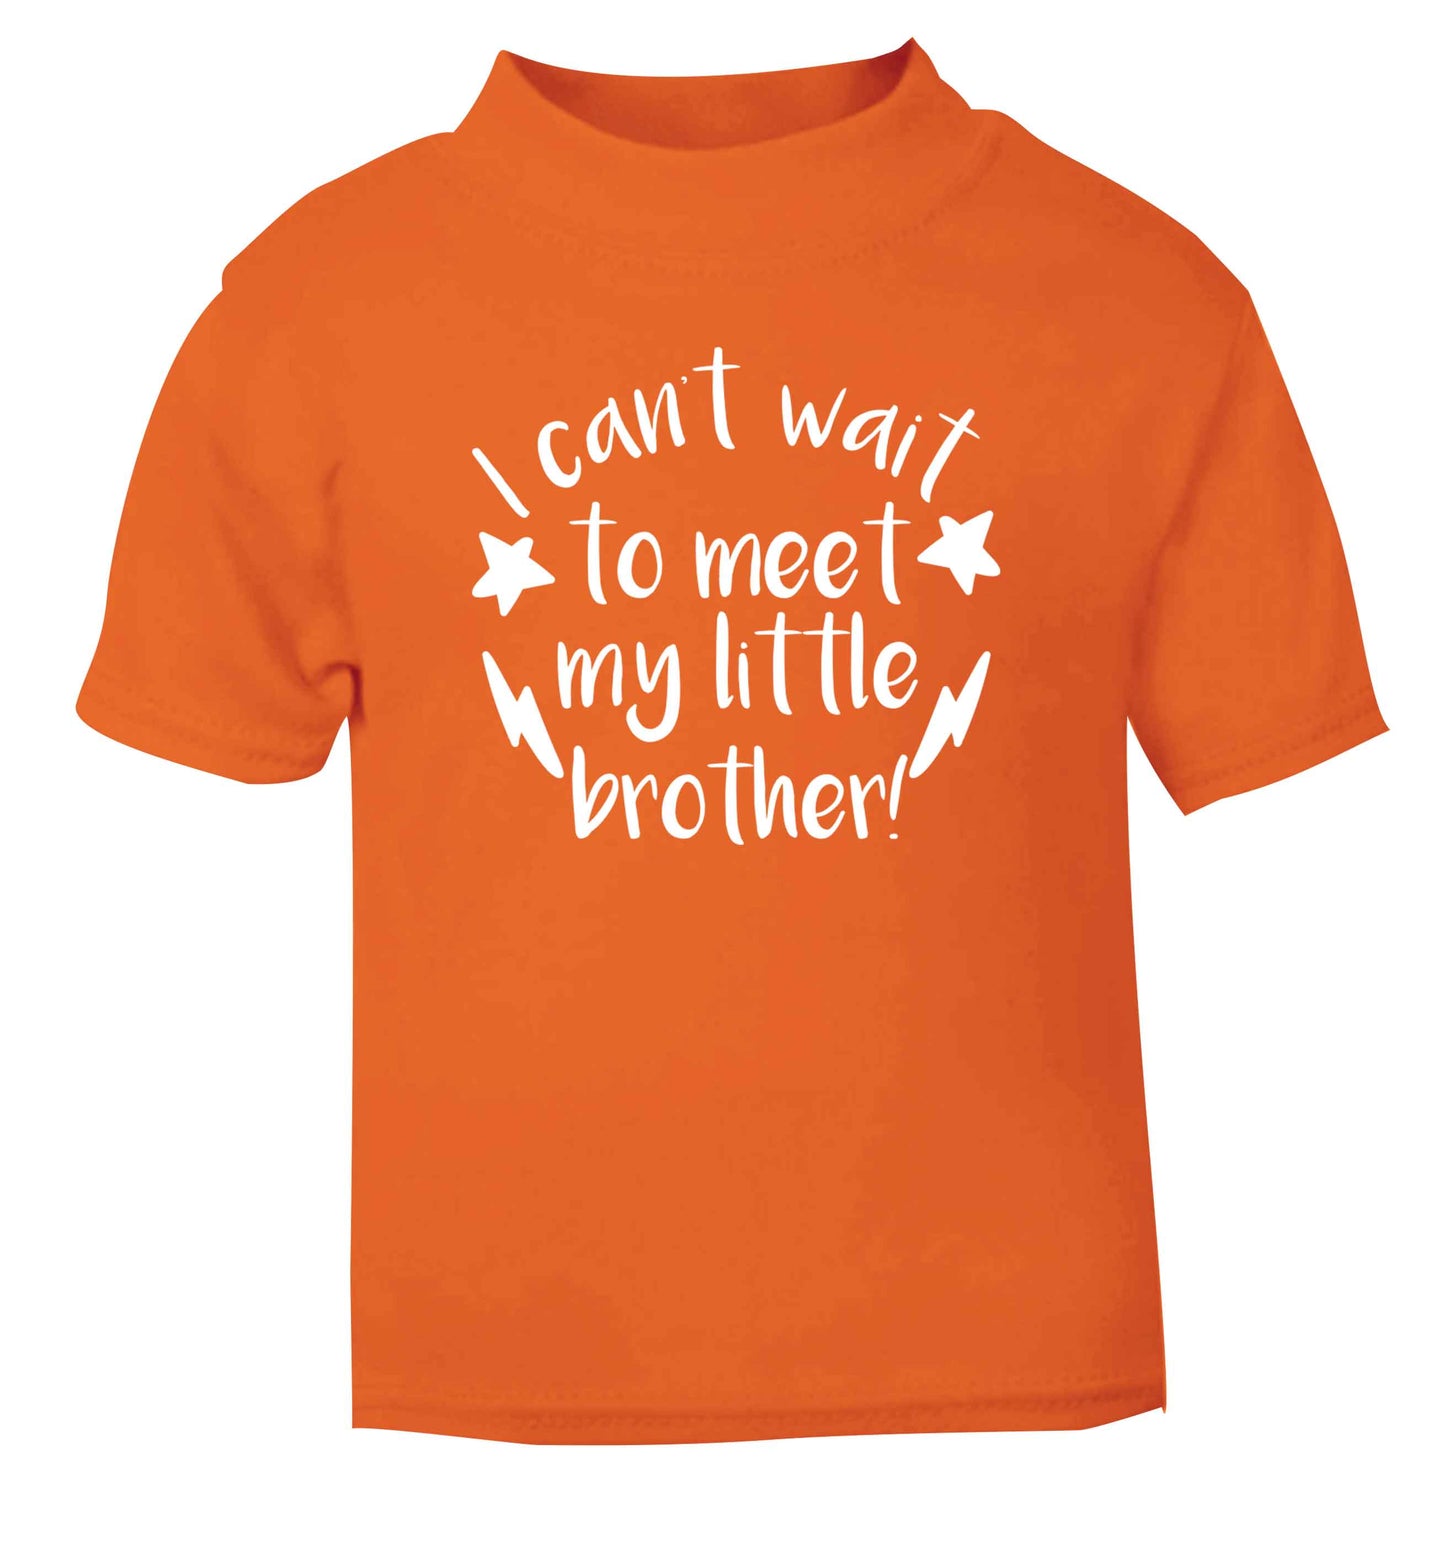 I can't wait to meet my sister! orange Baby Toddler Tshirt 2 Years